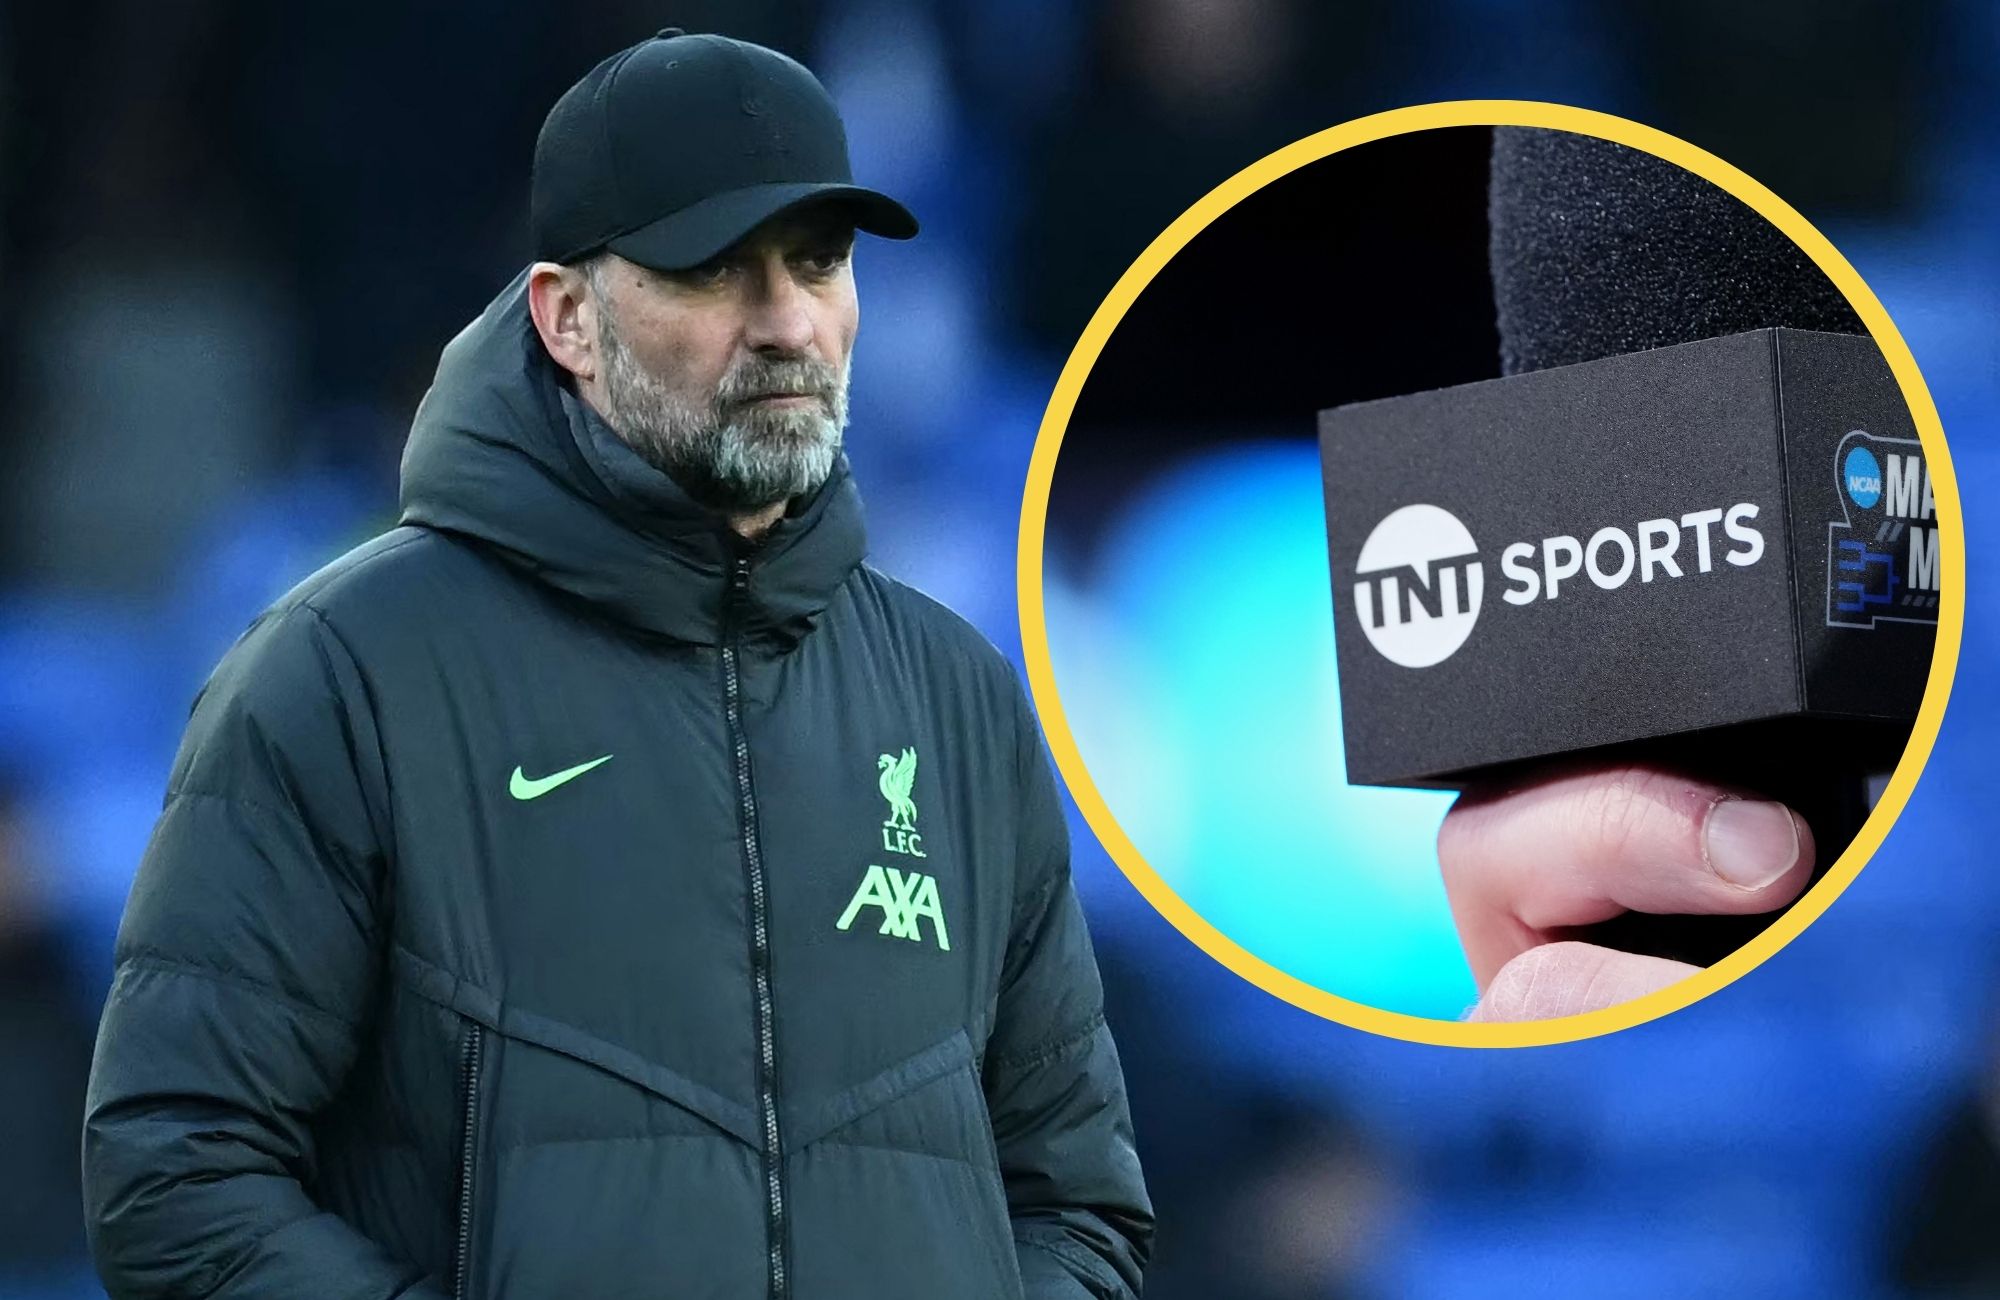 (Image) TNT Sports hit back at Klopp after Liverpool boss bins subscription